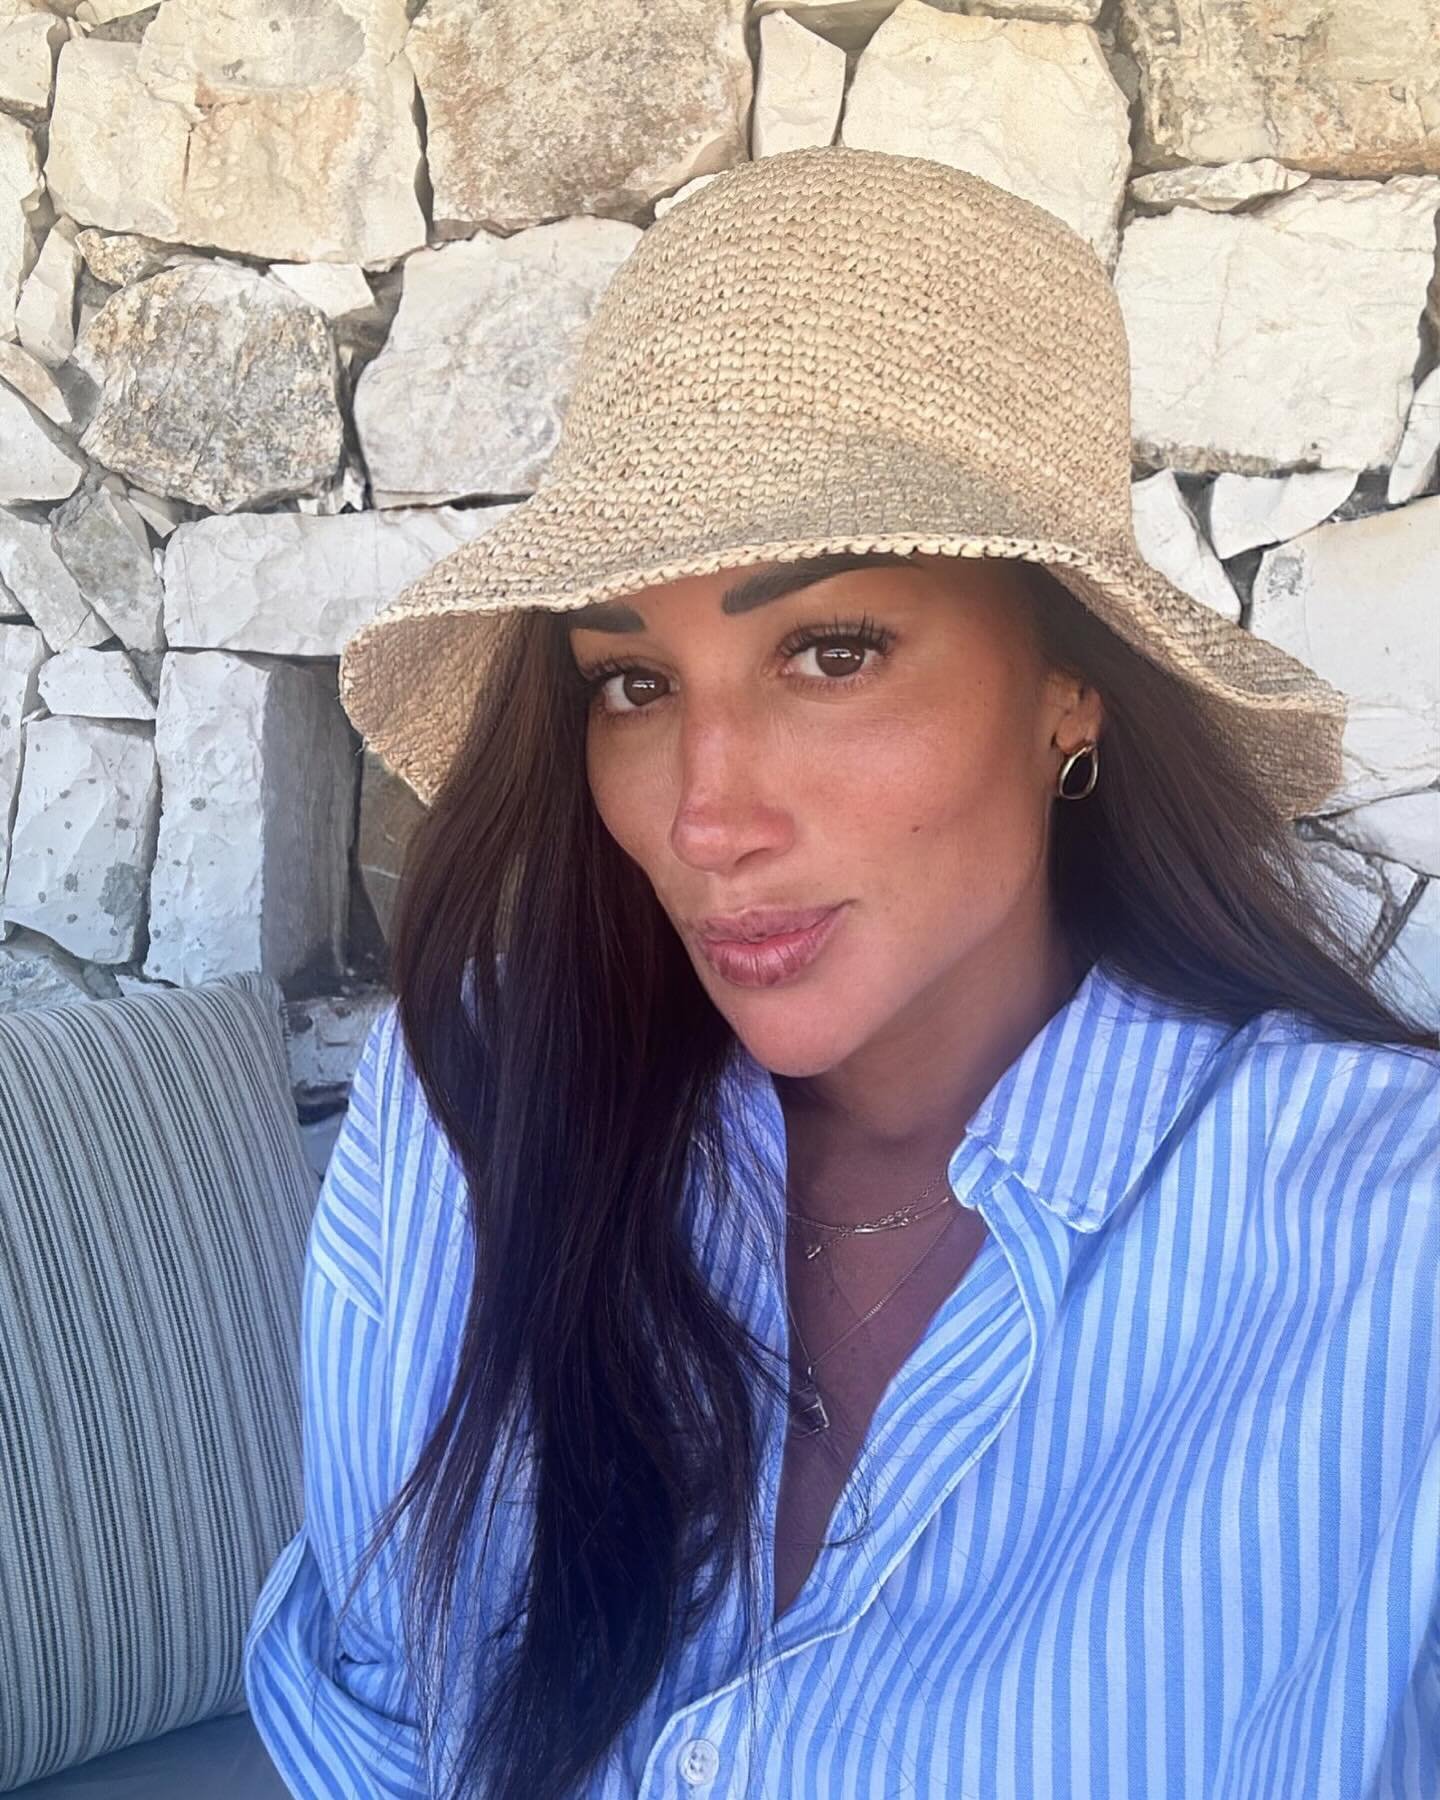 Bonita&rsquo;s raffia bucket hat has just landed and is a summer classic, whether you&rsquo;re sunbathing on the beach or exploring the city on sun-soaked days, Bonita&rsquo;s raffia bucket will suit all vacation plans 🍋☀️💛

#boutiquebonitaglobal #